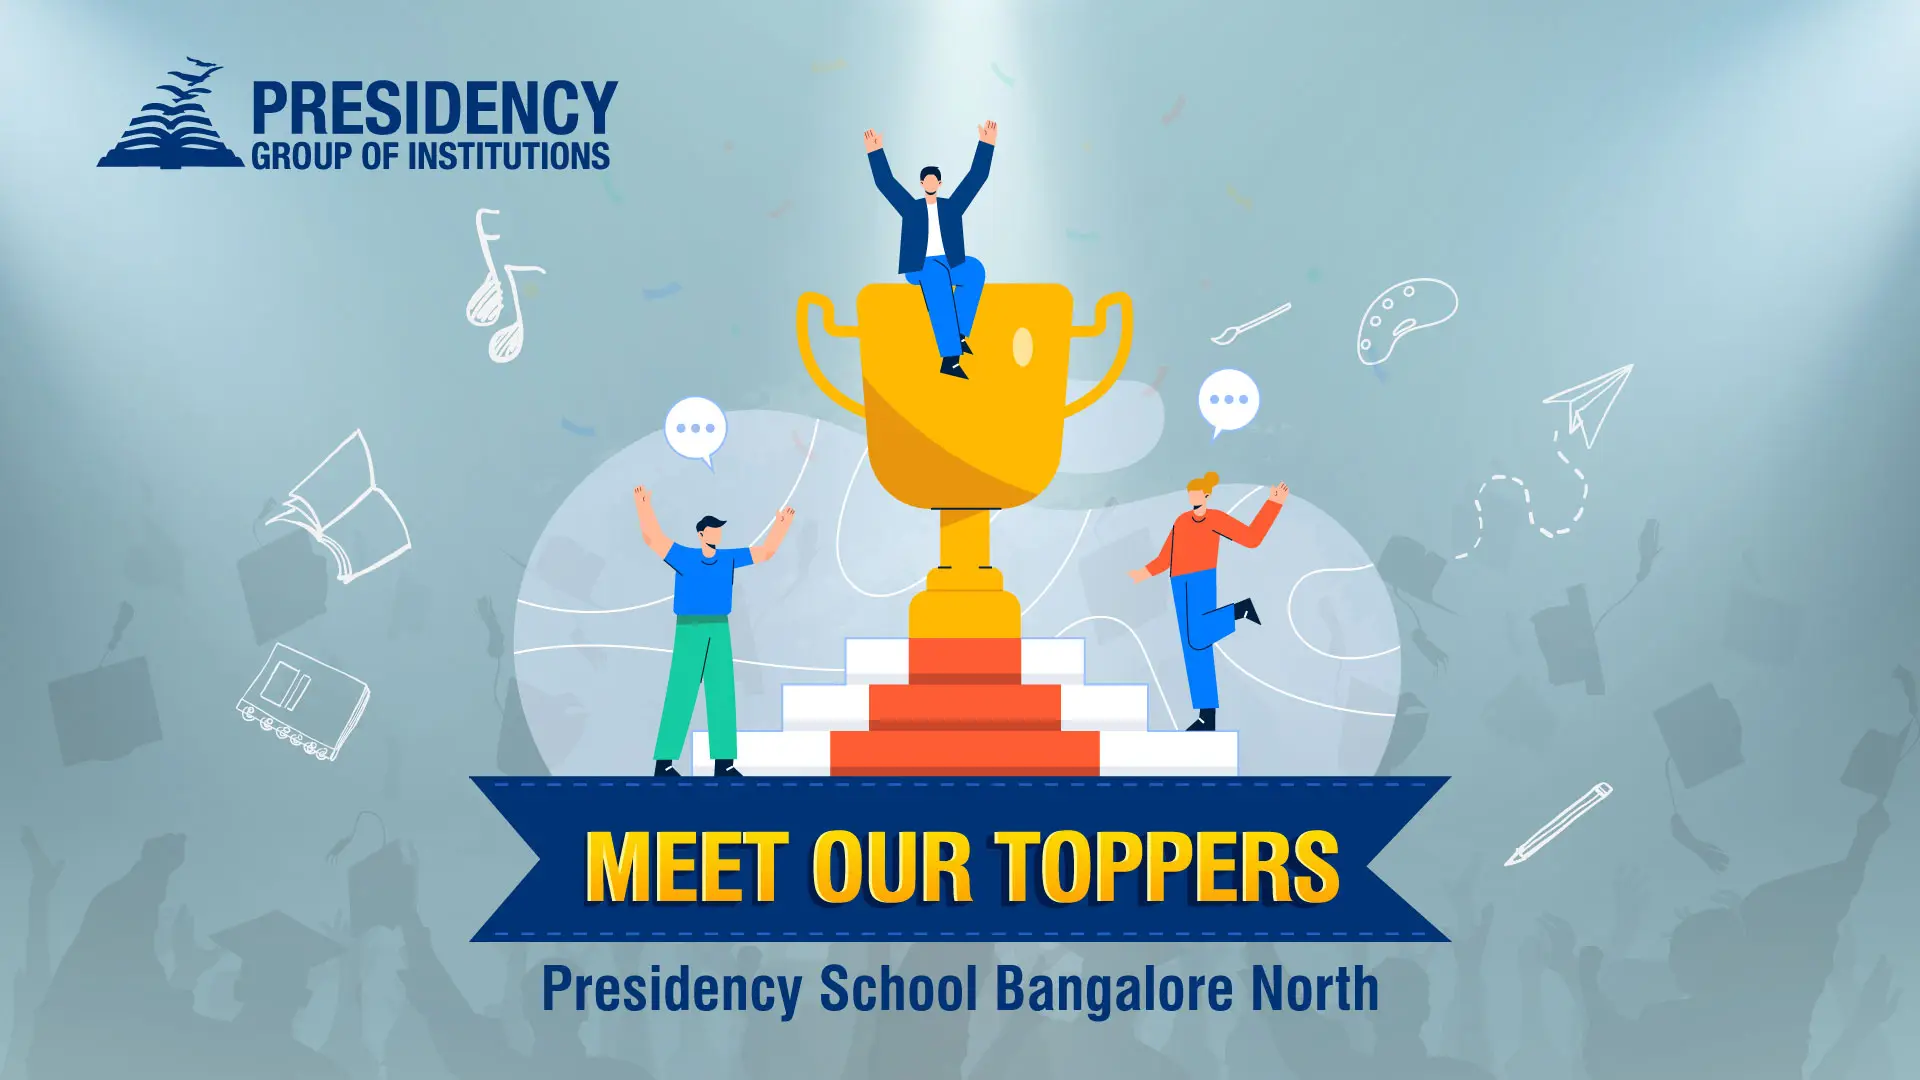 The school toppers of Predidency school Bangalore North